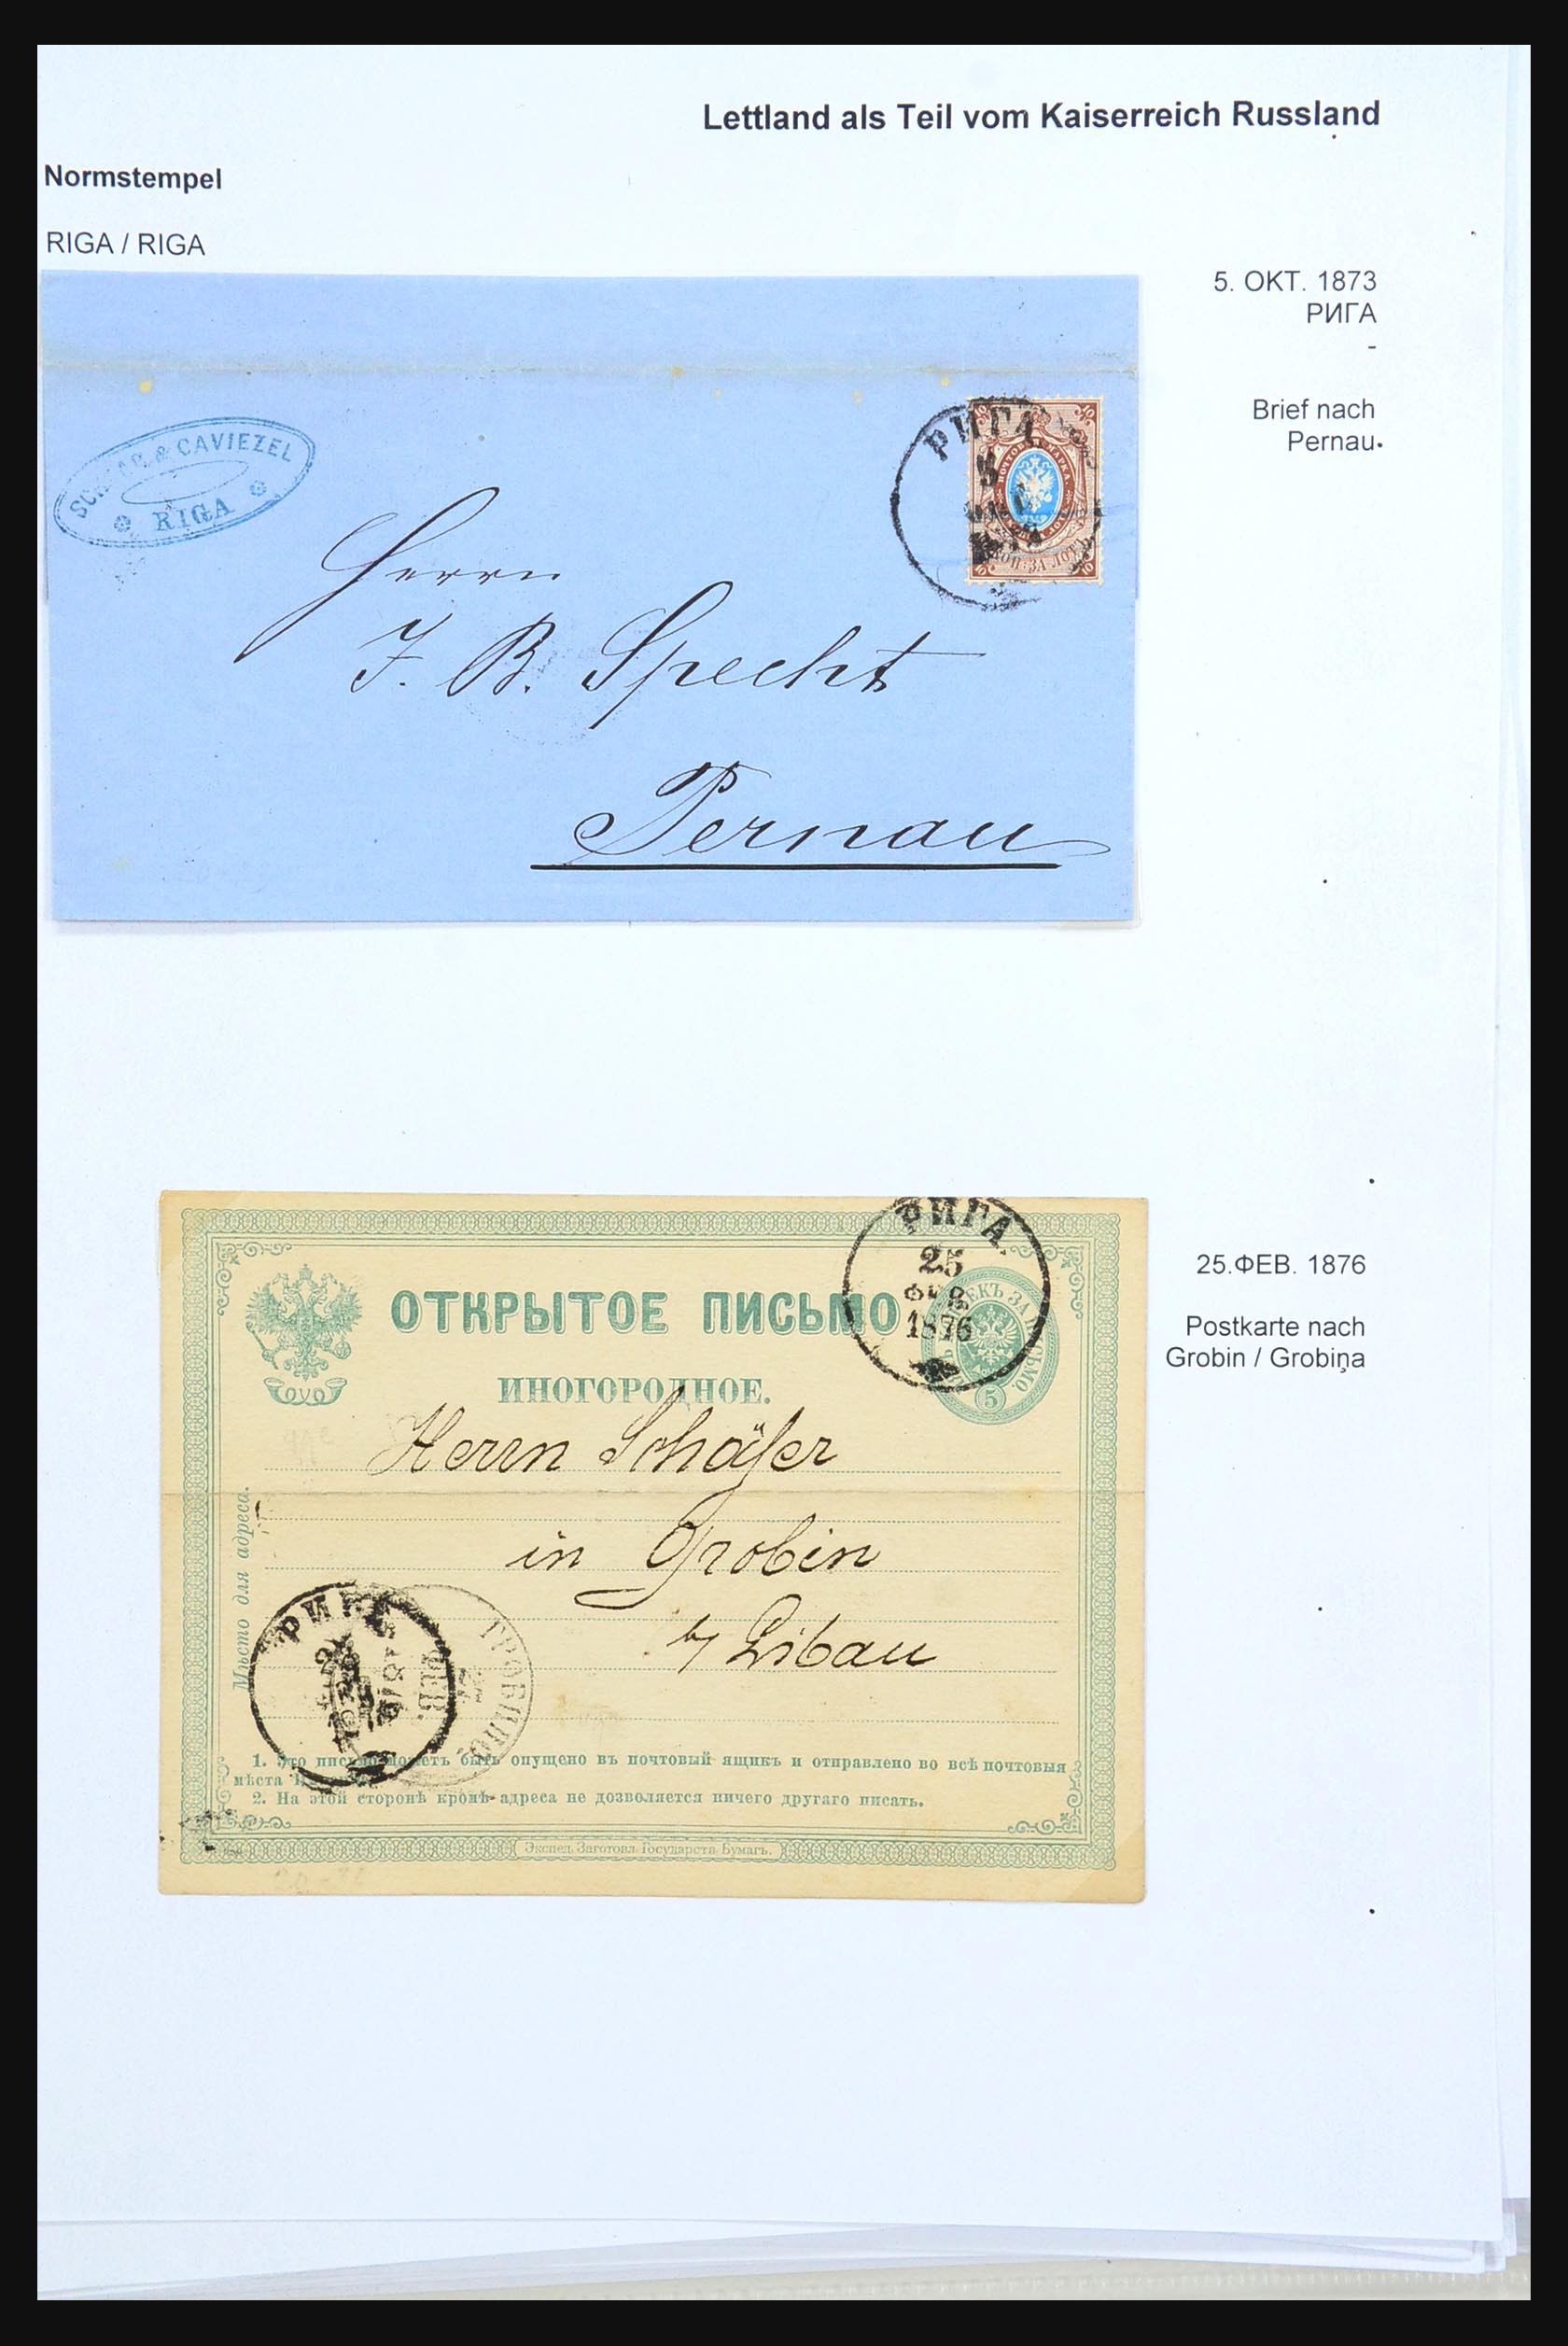 31305 070 - 31305 Latvia as part of Russia 1817-1918.